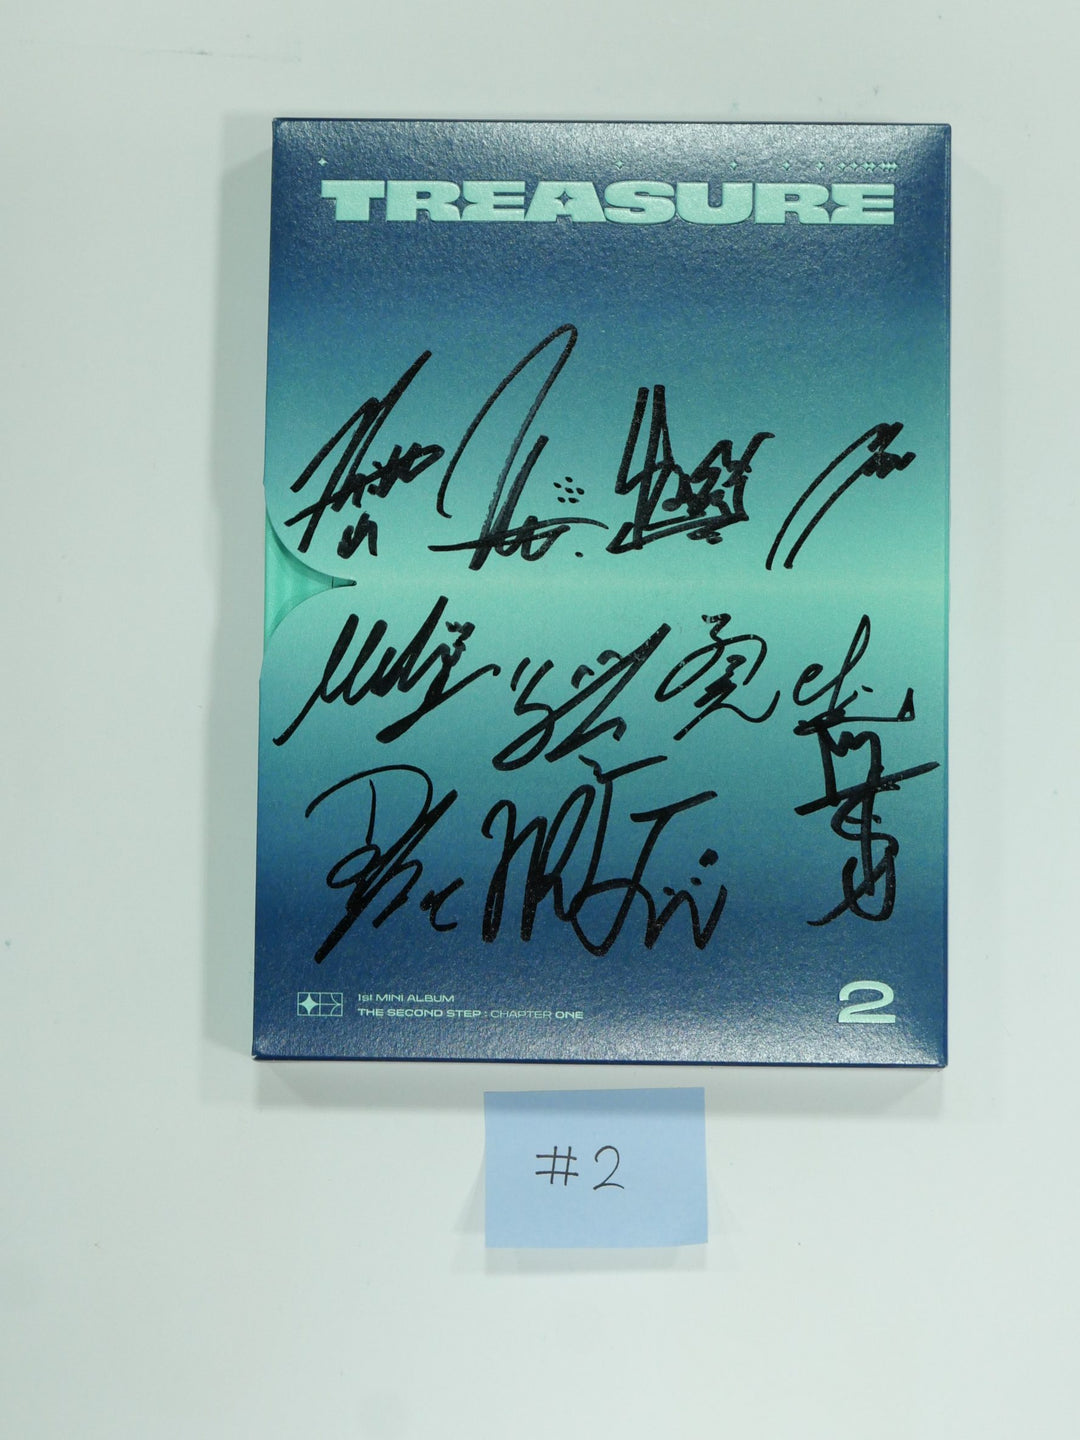 Treasure 'THE SECOND STEP : CHAPTER ONE' - Hand Autographed(Signed) Promo Album